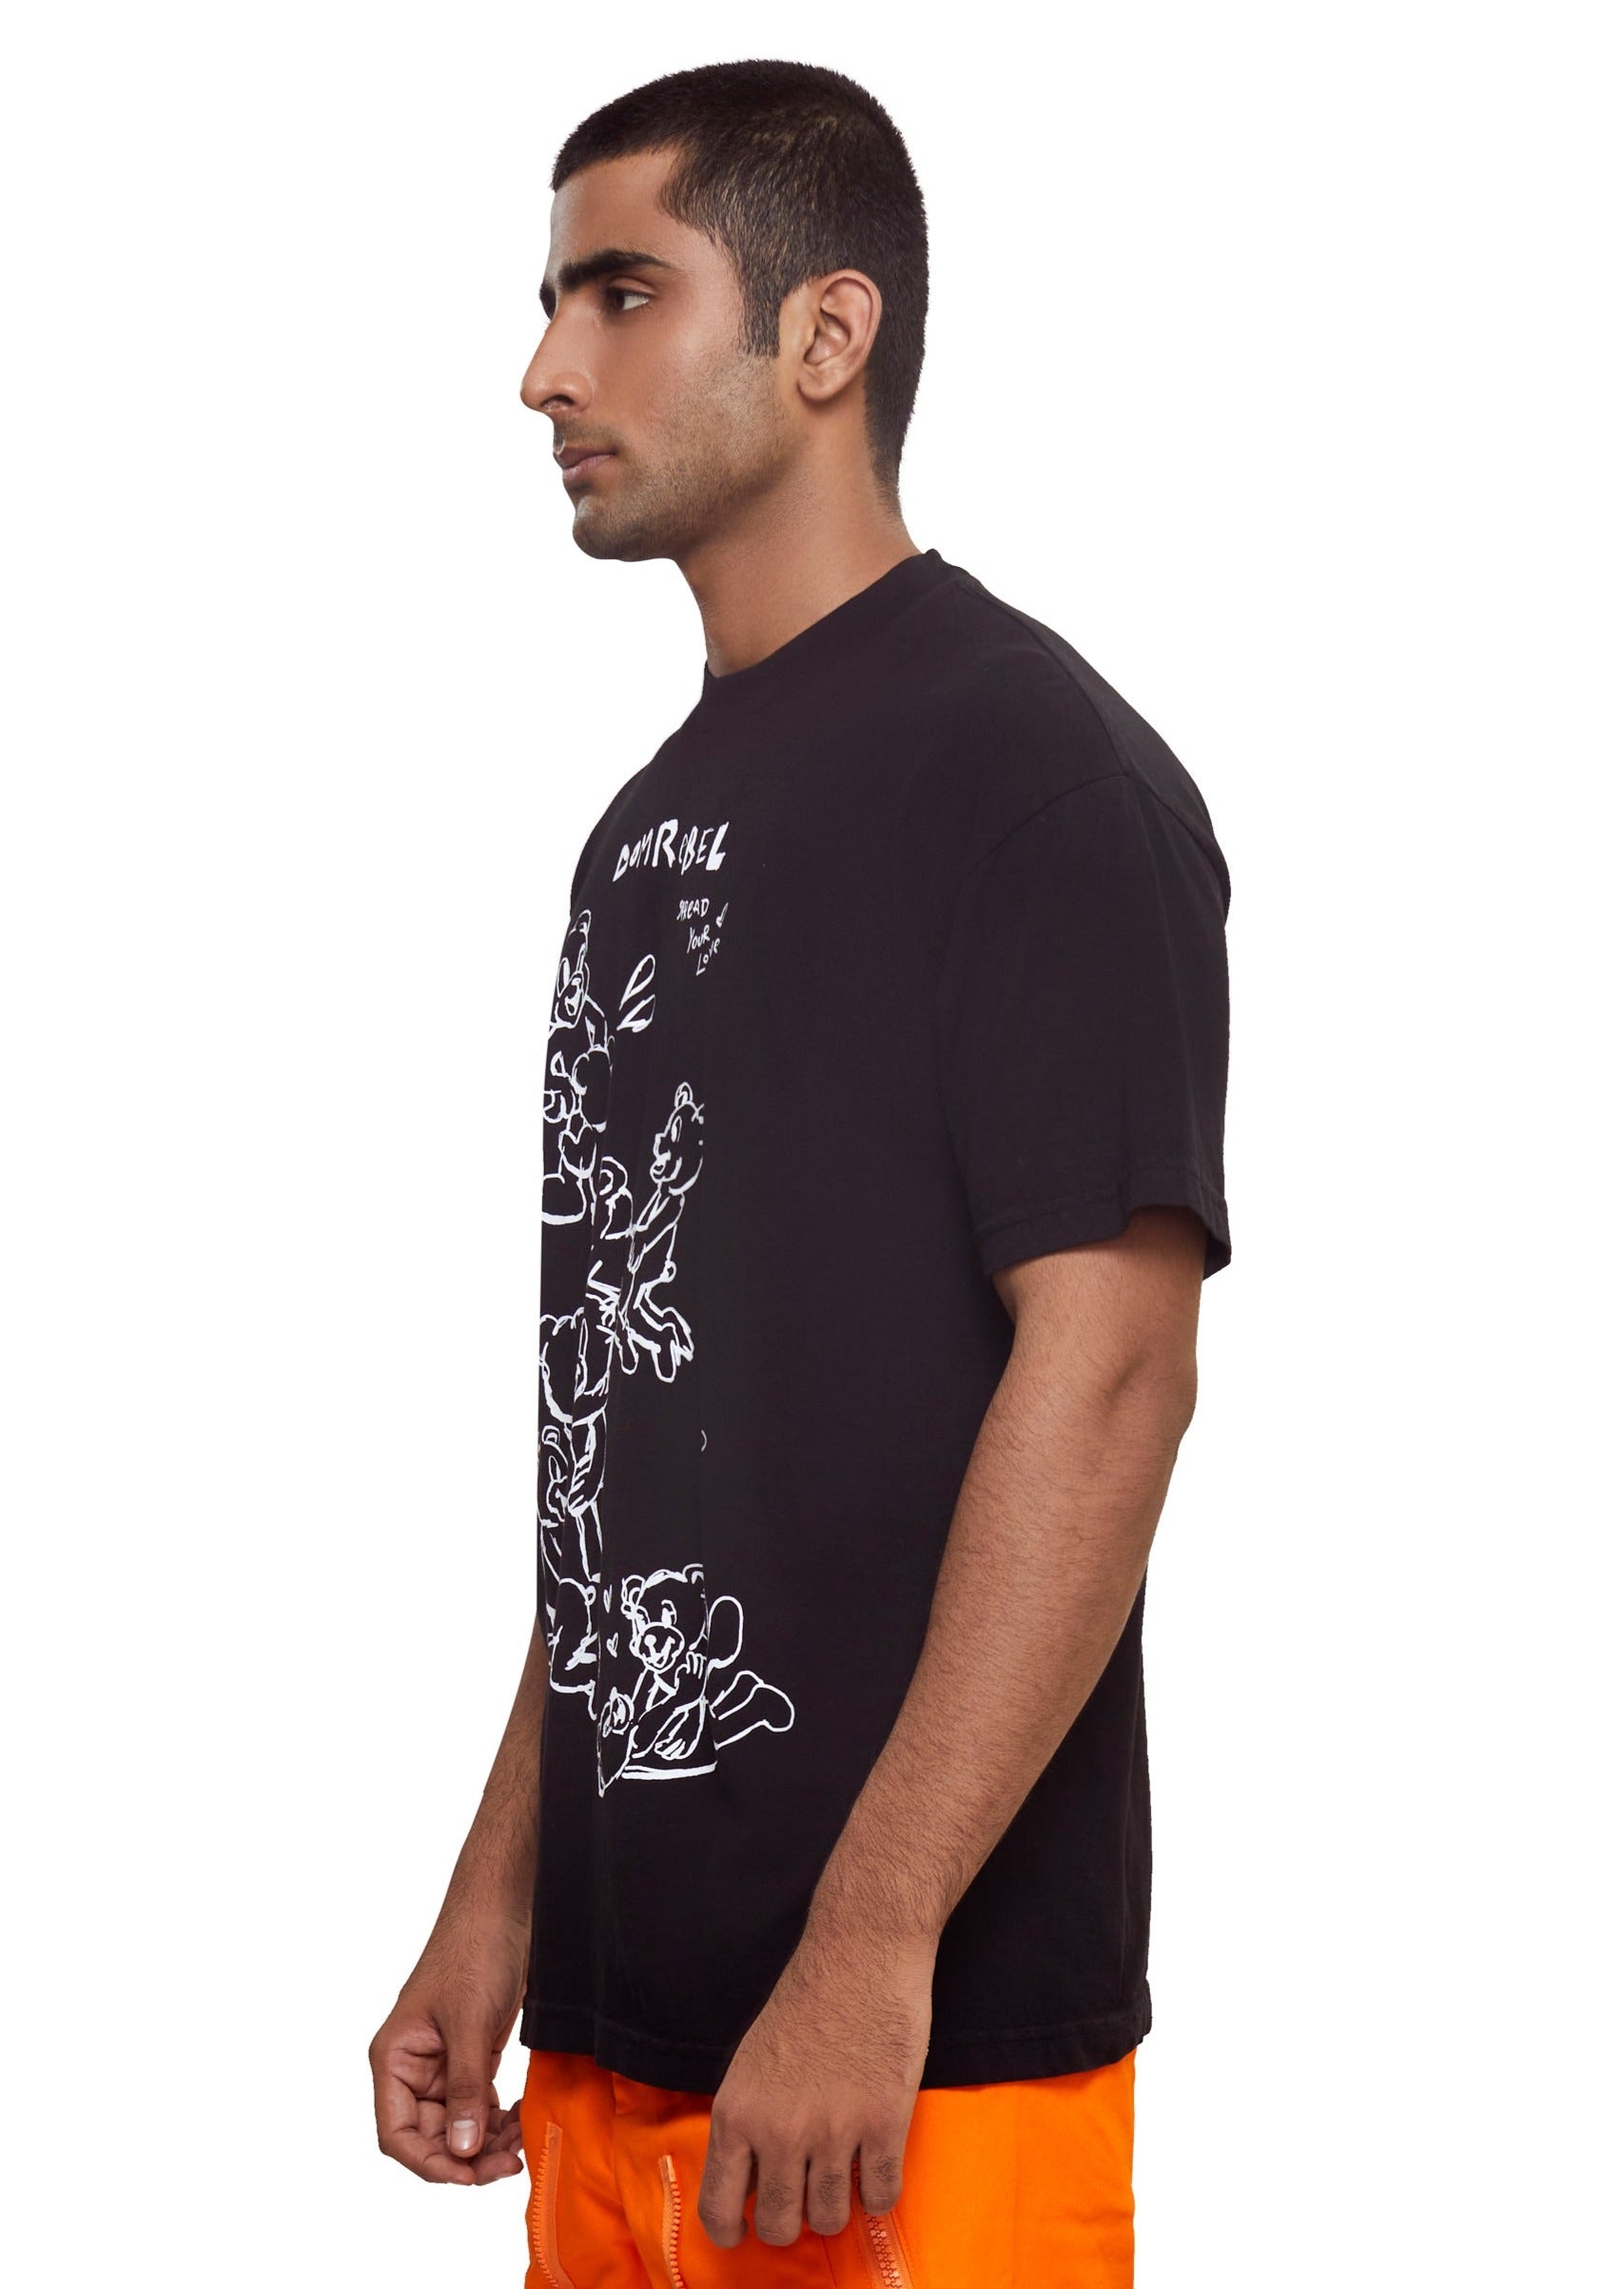 Black Graphic t-shirt by Domrebel in a medium weight 100% cotton fabric from the brand Domrebel